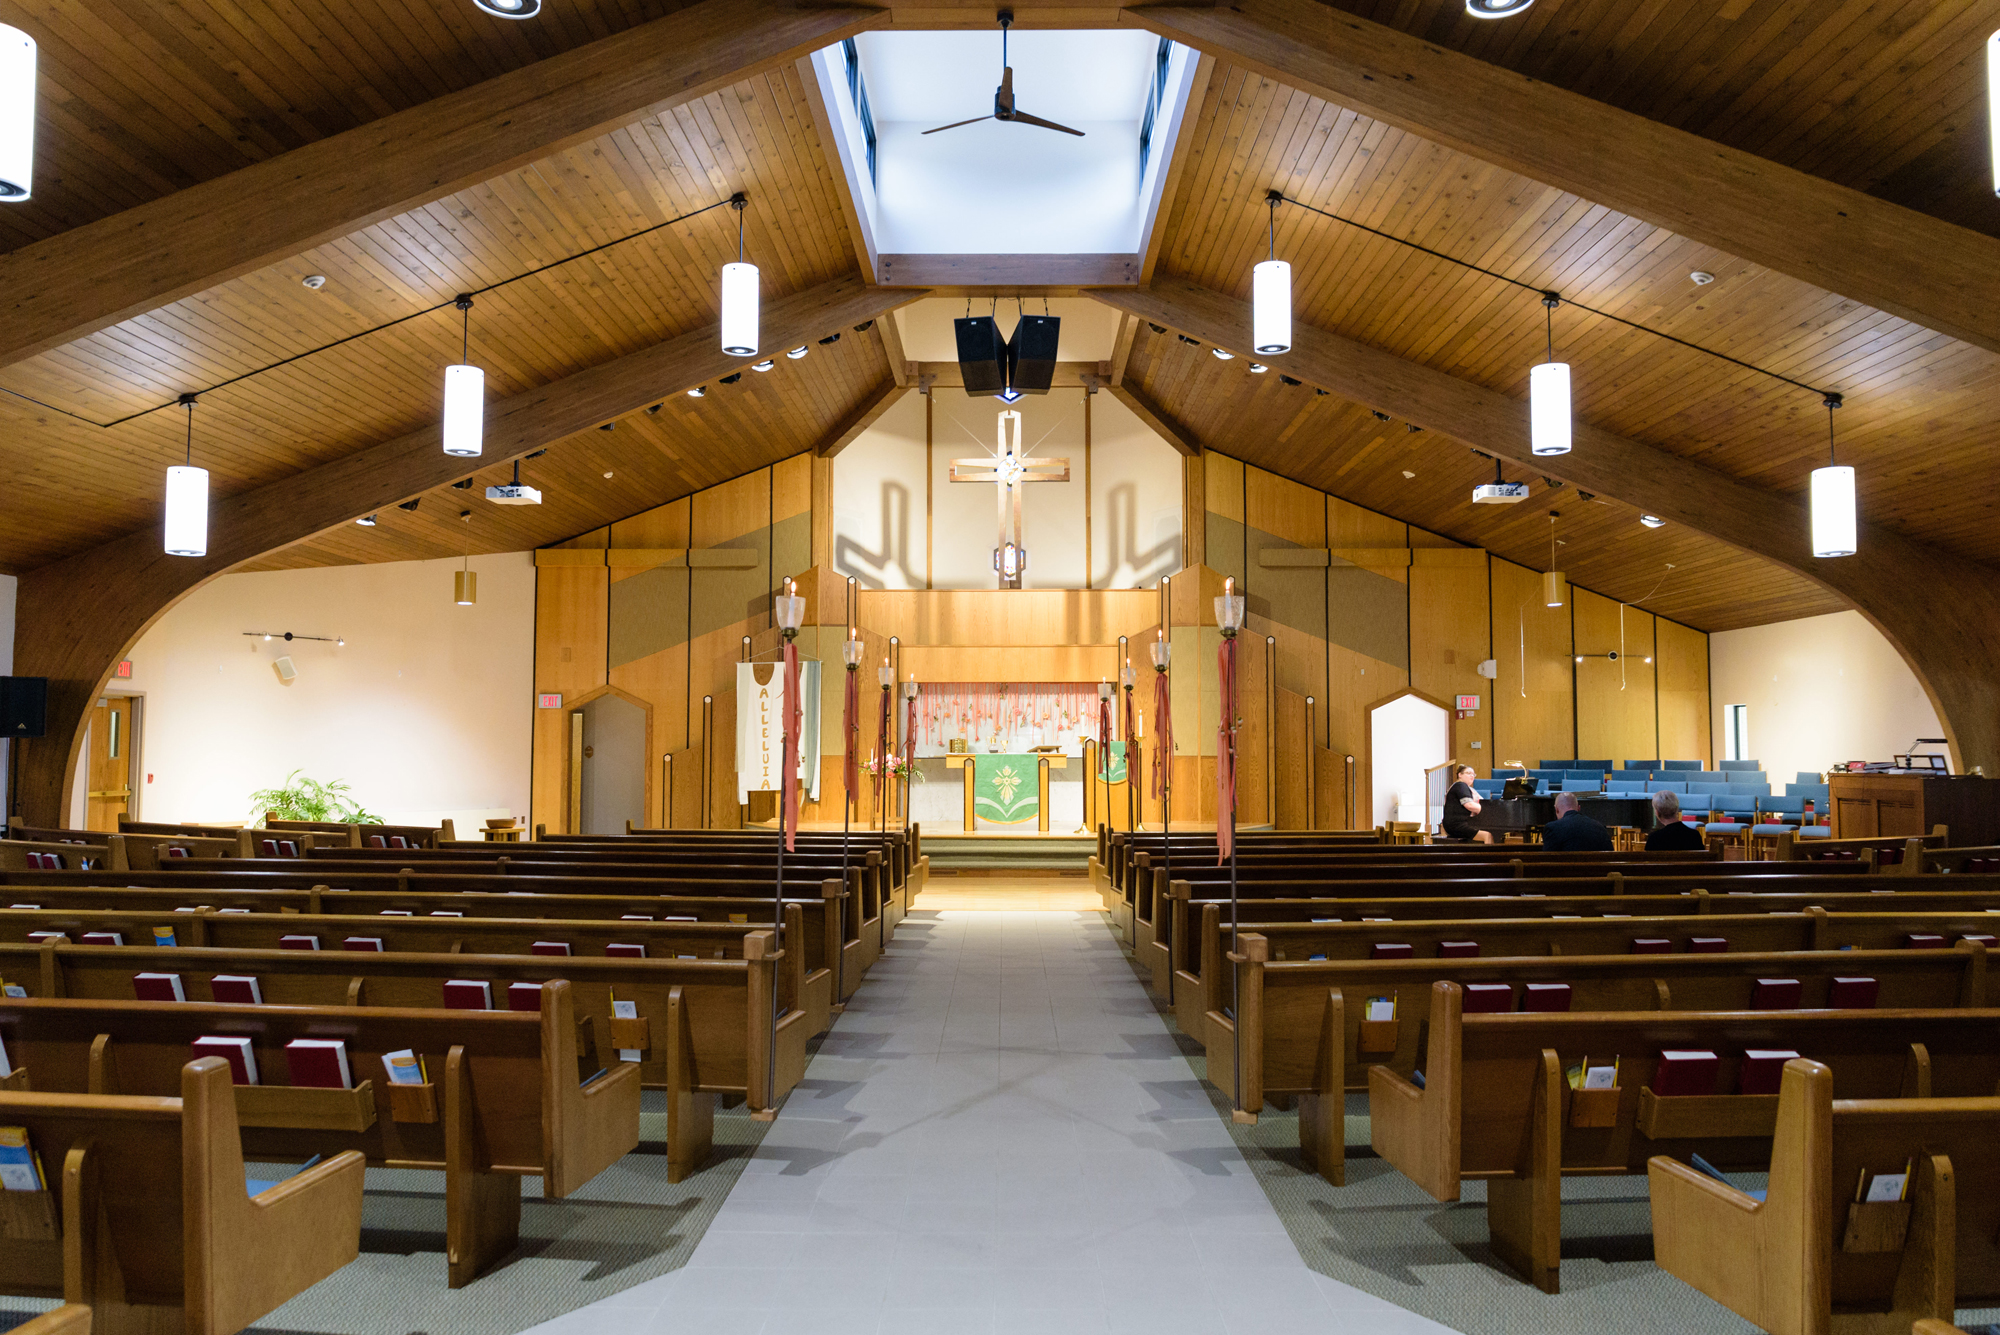 Wedding ceremony details at Christ the King Lutheran Church